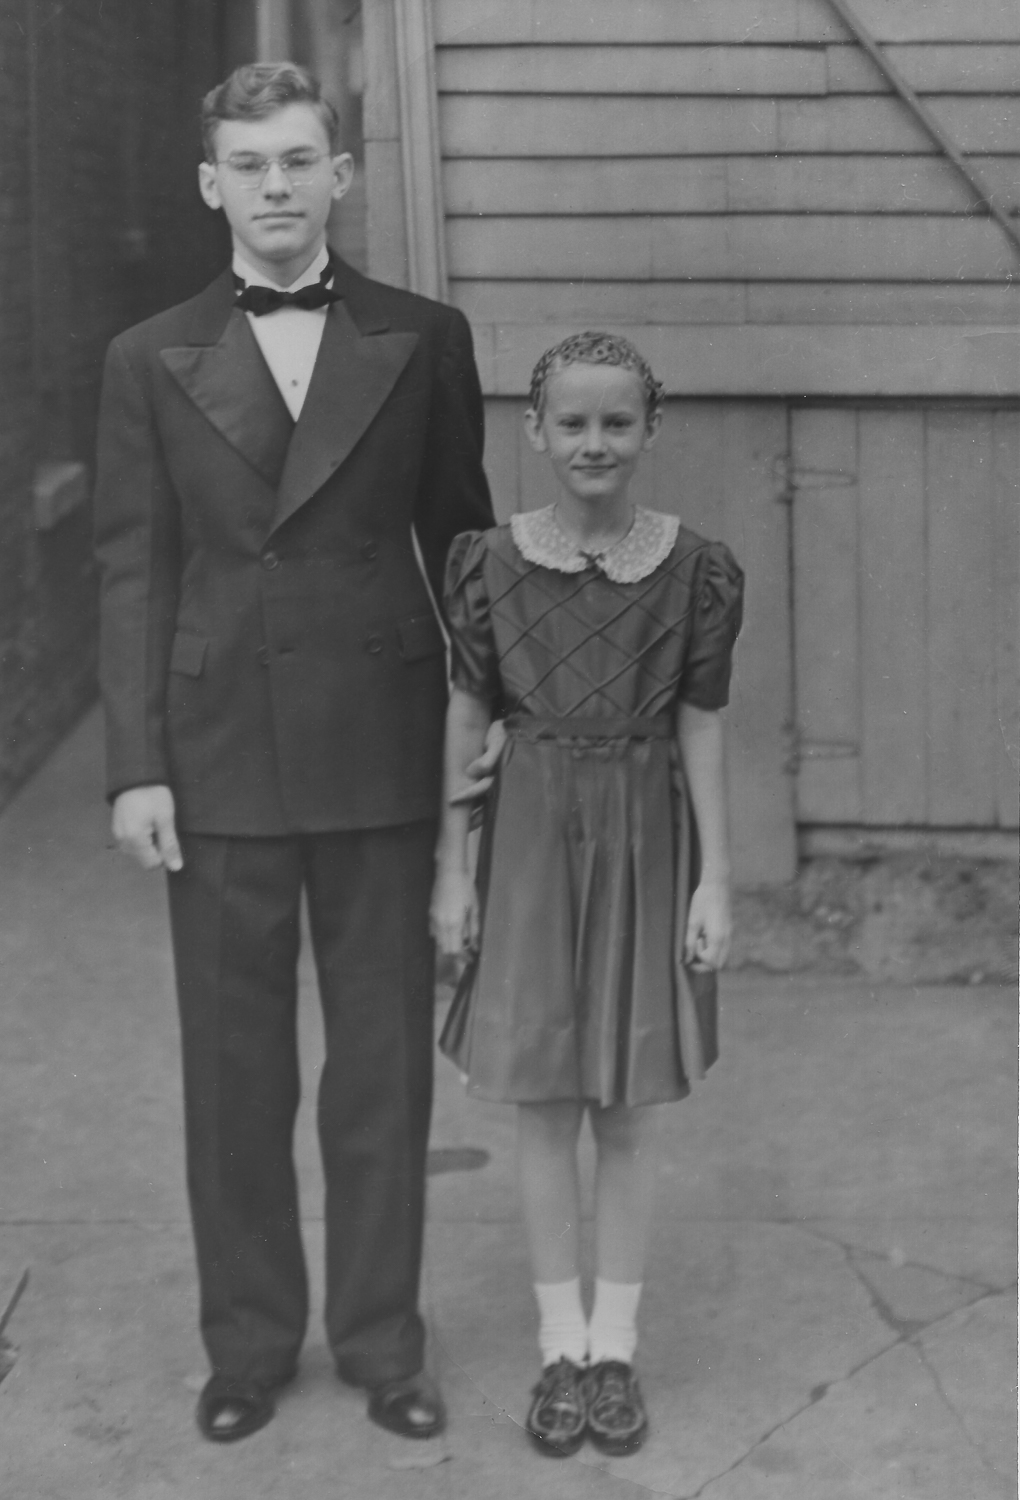 John and Bernice, dressed up for Herb and Mary's wedding, 1940